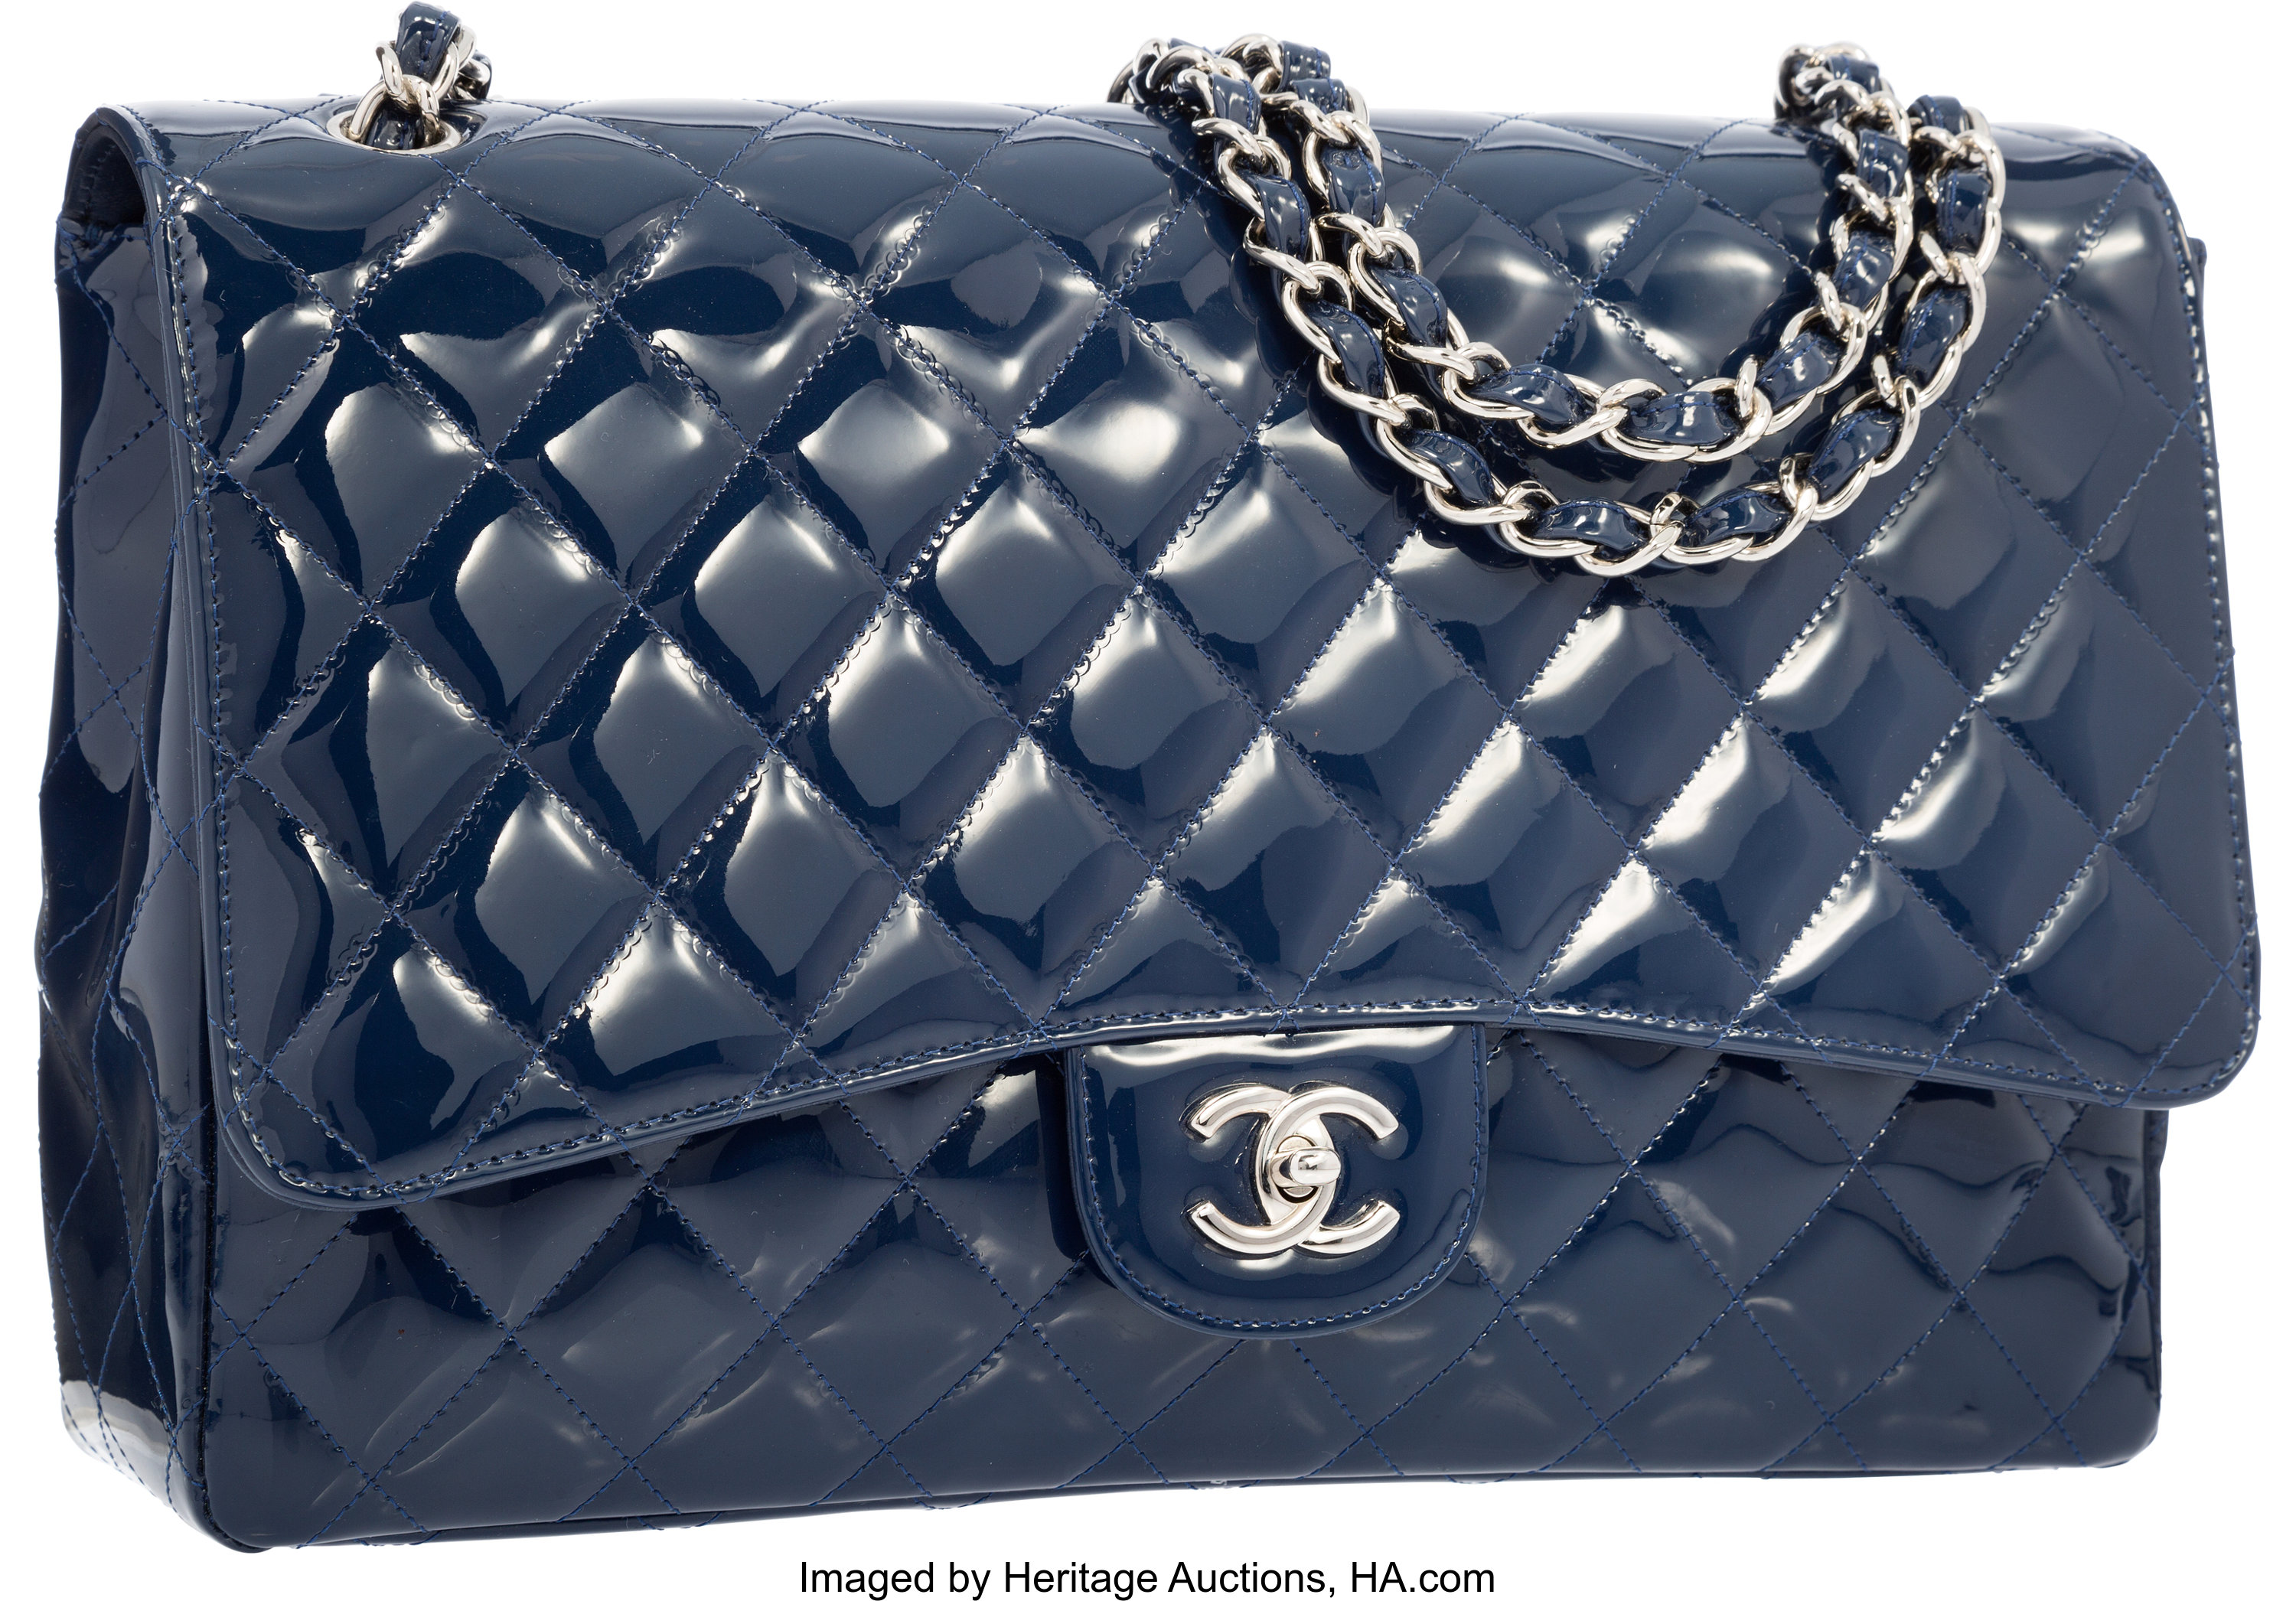 Chanel Navy Blue Quilted Patent Leather Maxi Single Flap Bag with